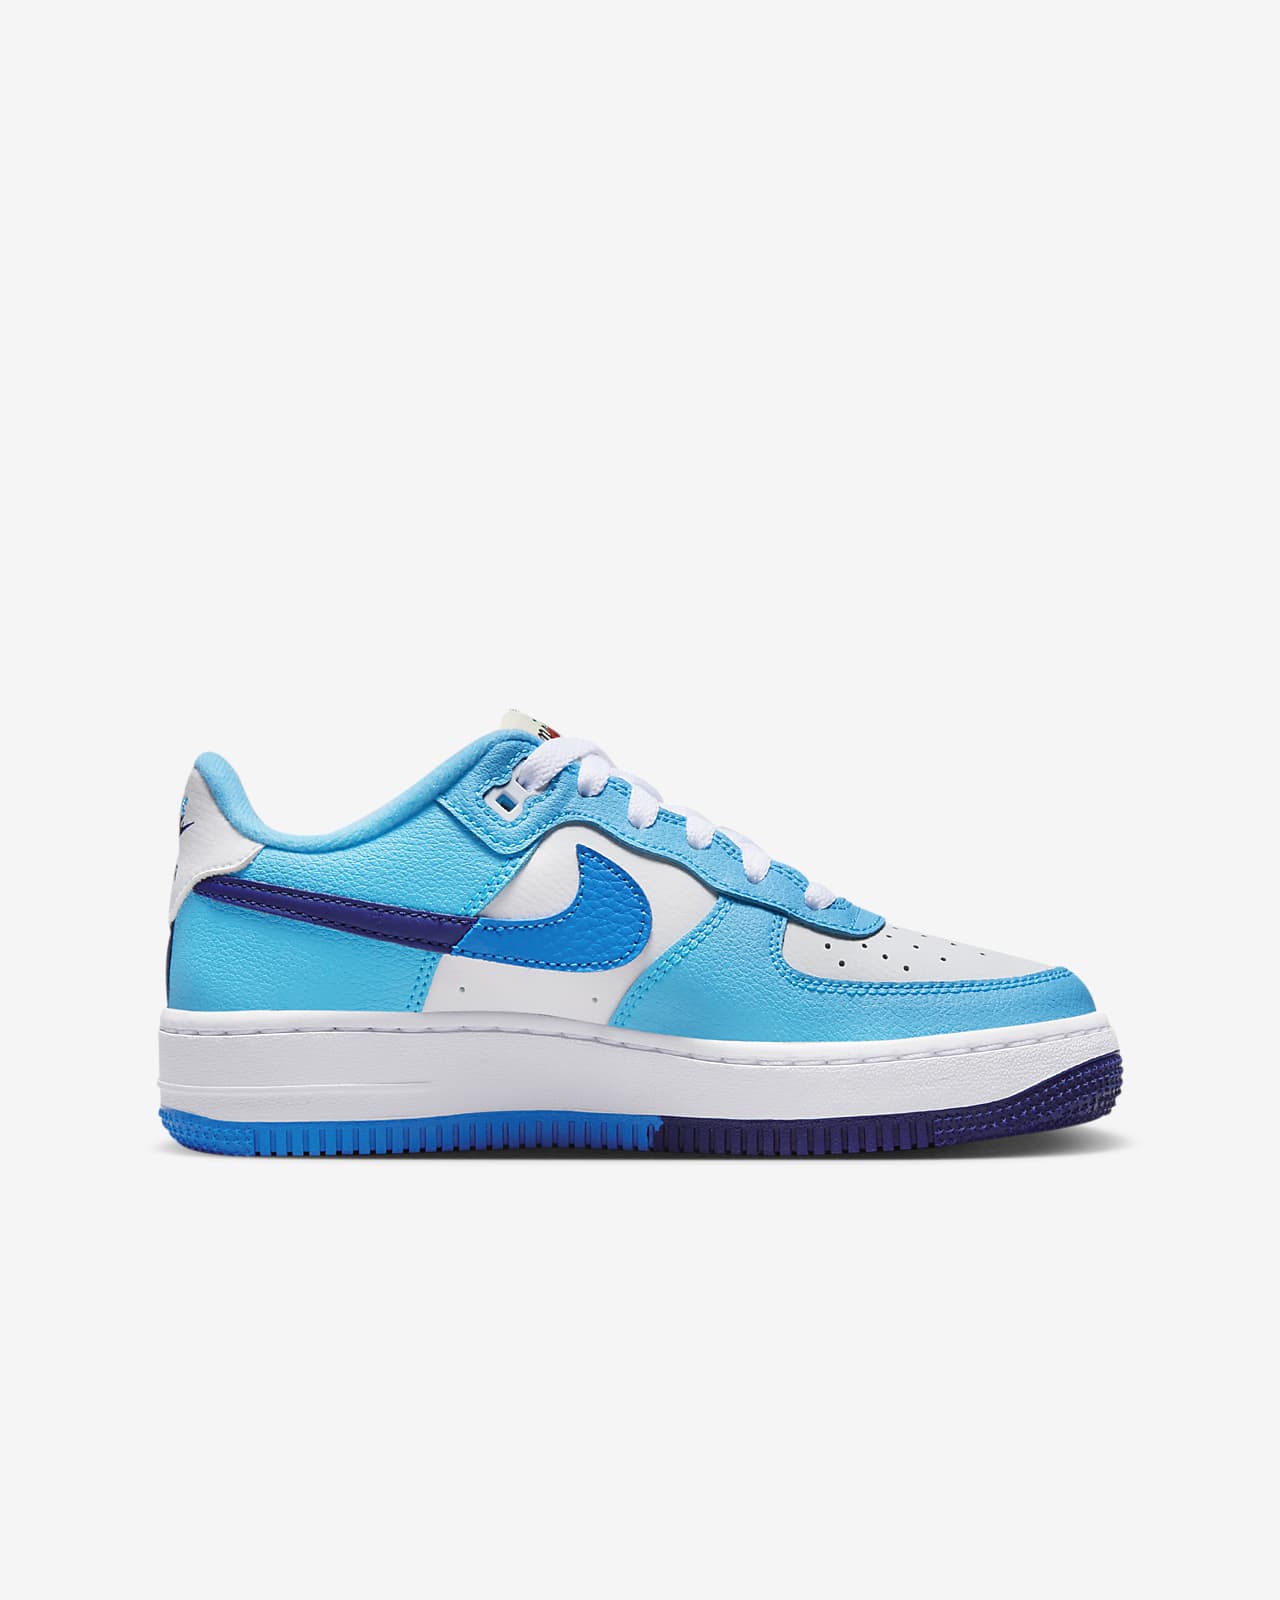 Nike Air Force 1 LV8 2 Older Kids' Shoes Size 7Y (White)